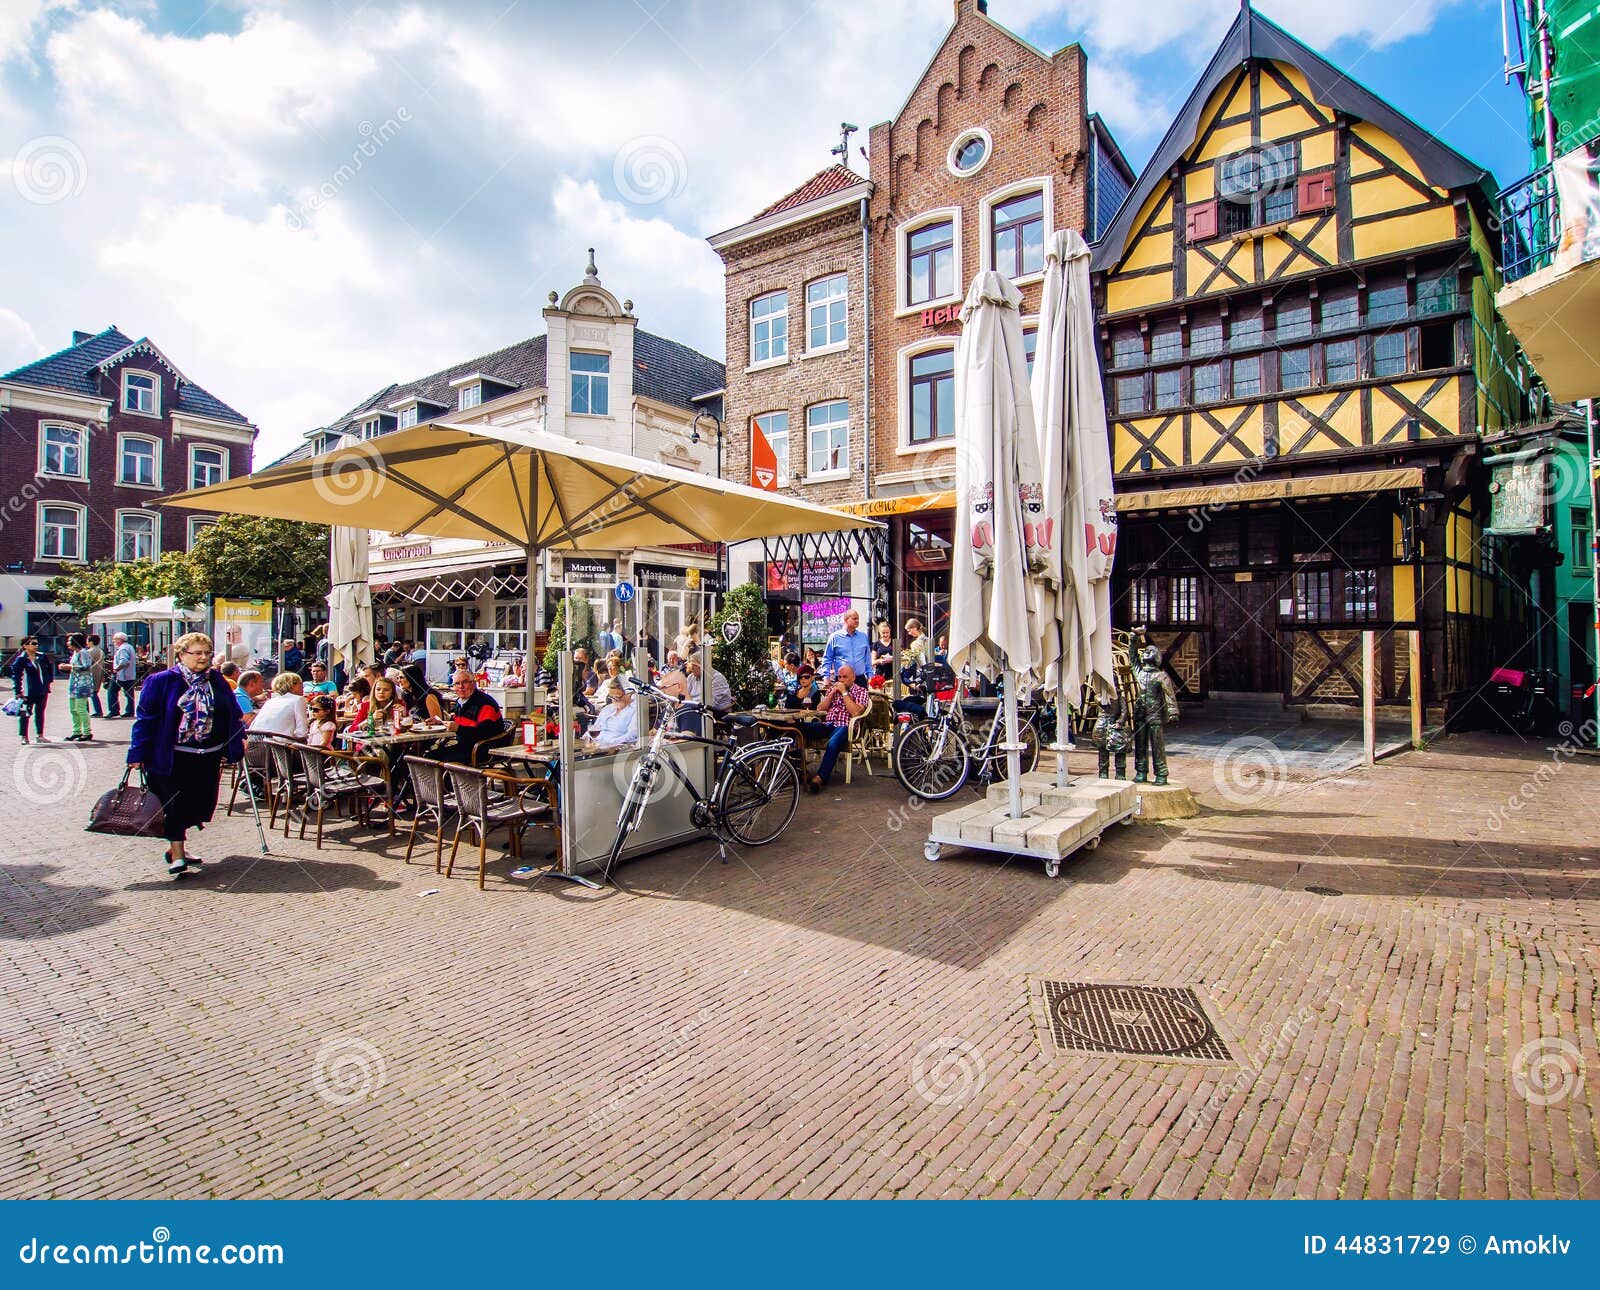 Day View Of Market Square. Sittard. Netherlands Editorial